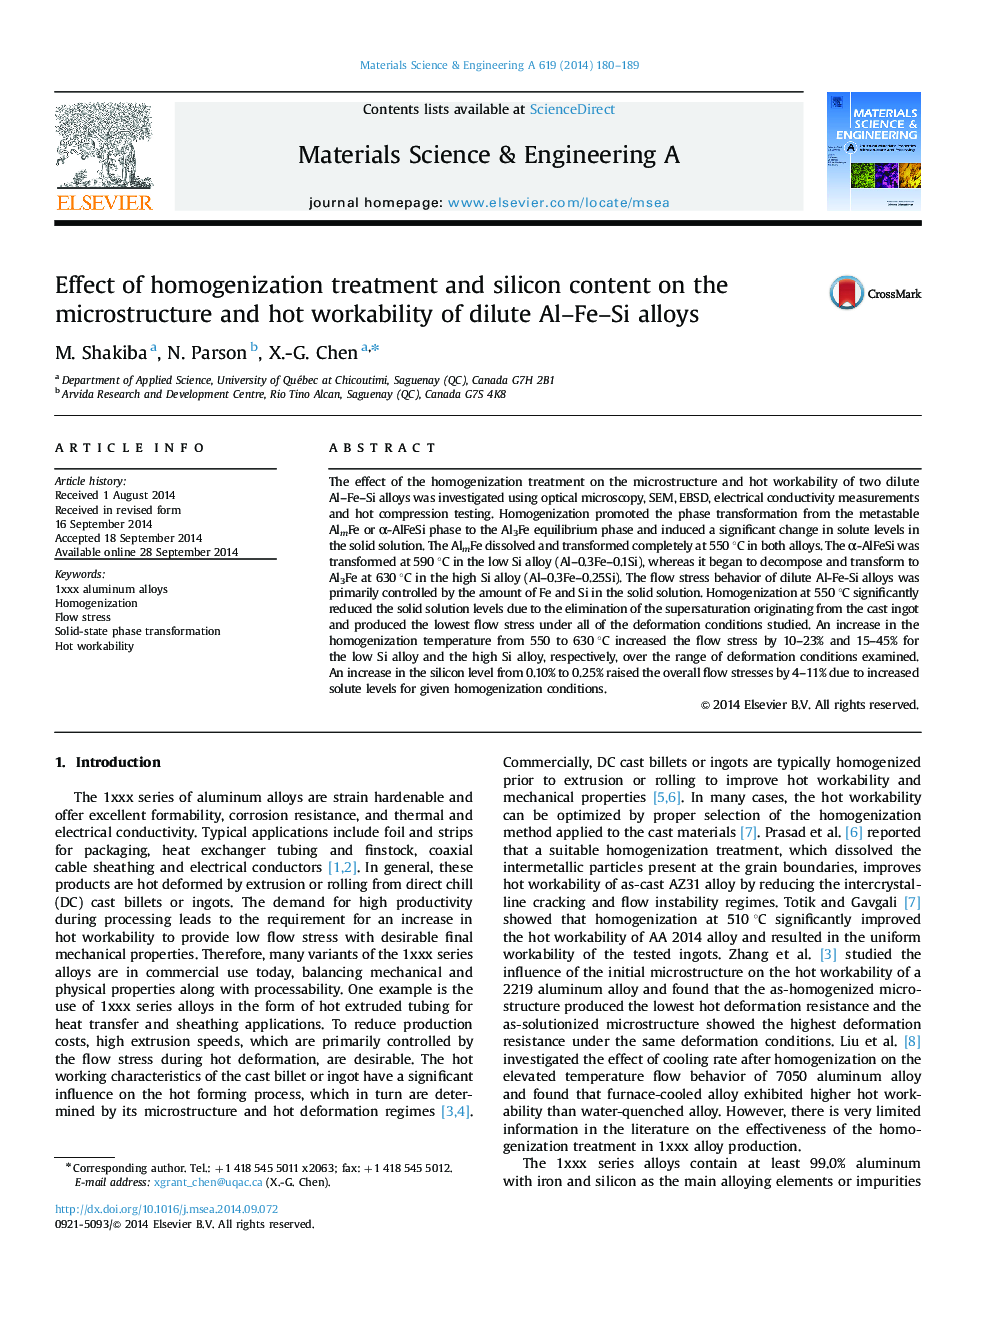 Effect of homogenization treatment and silicon content on the microstructure and hot workability of dilute Al–Fe–Si alloys